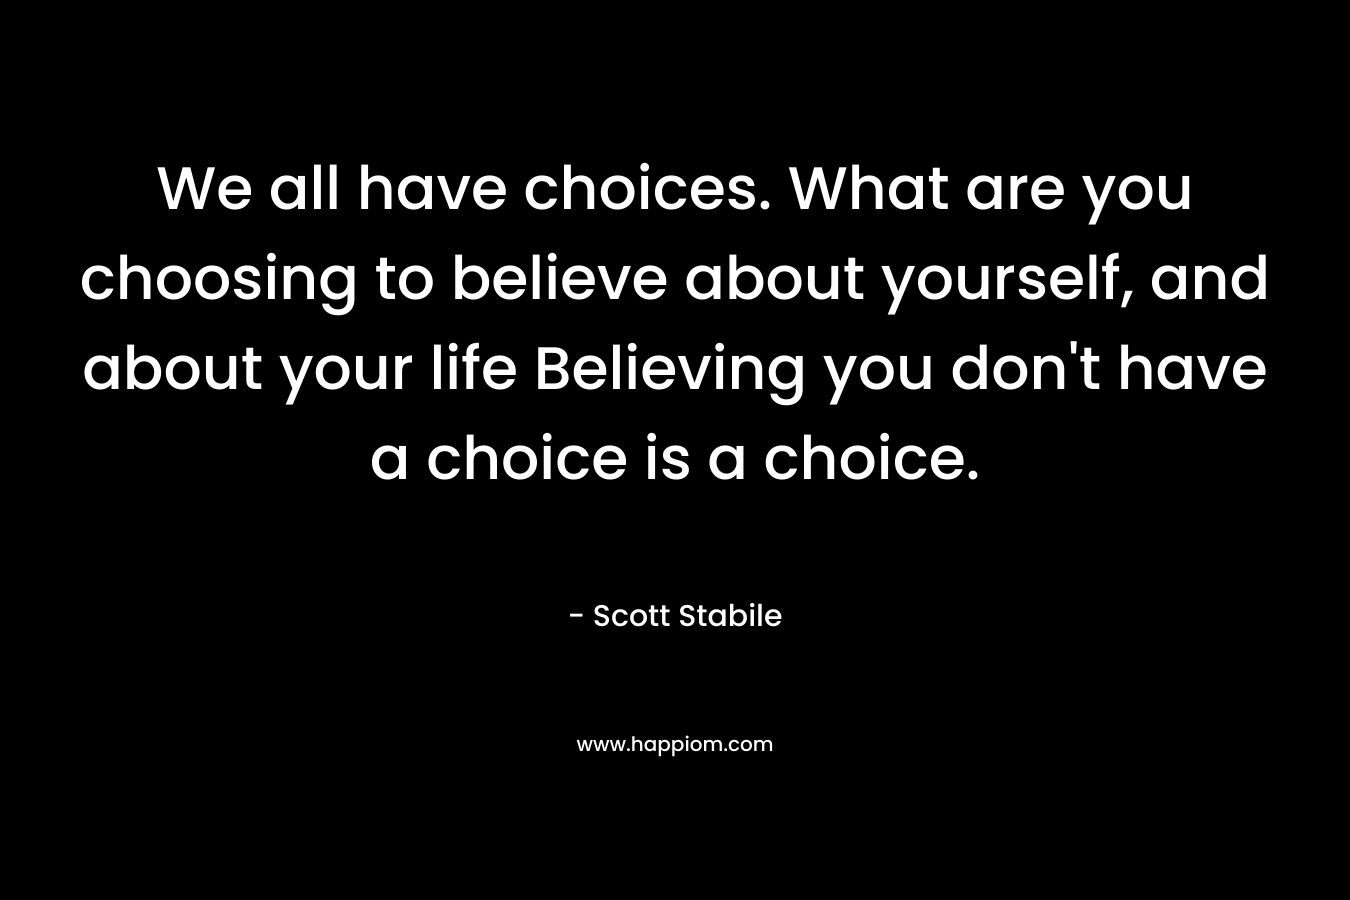 We all have choices. What are you choosing to believe about yourself, and about your life Believing you don't have a choice is a choice.